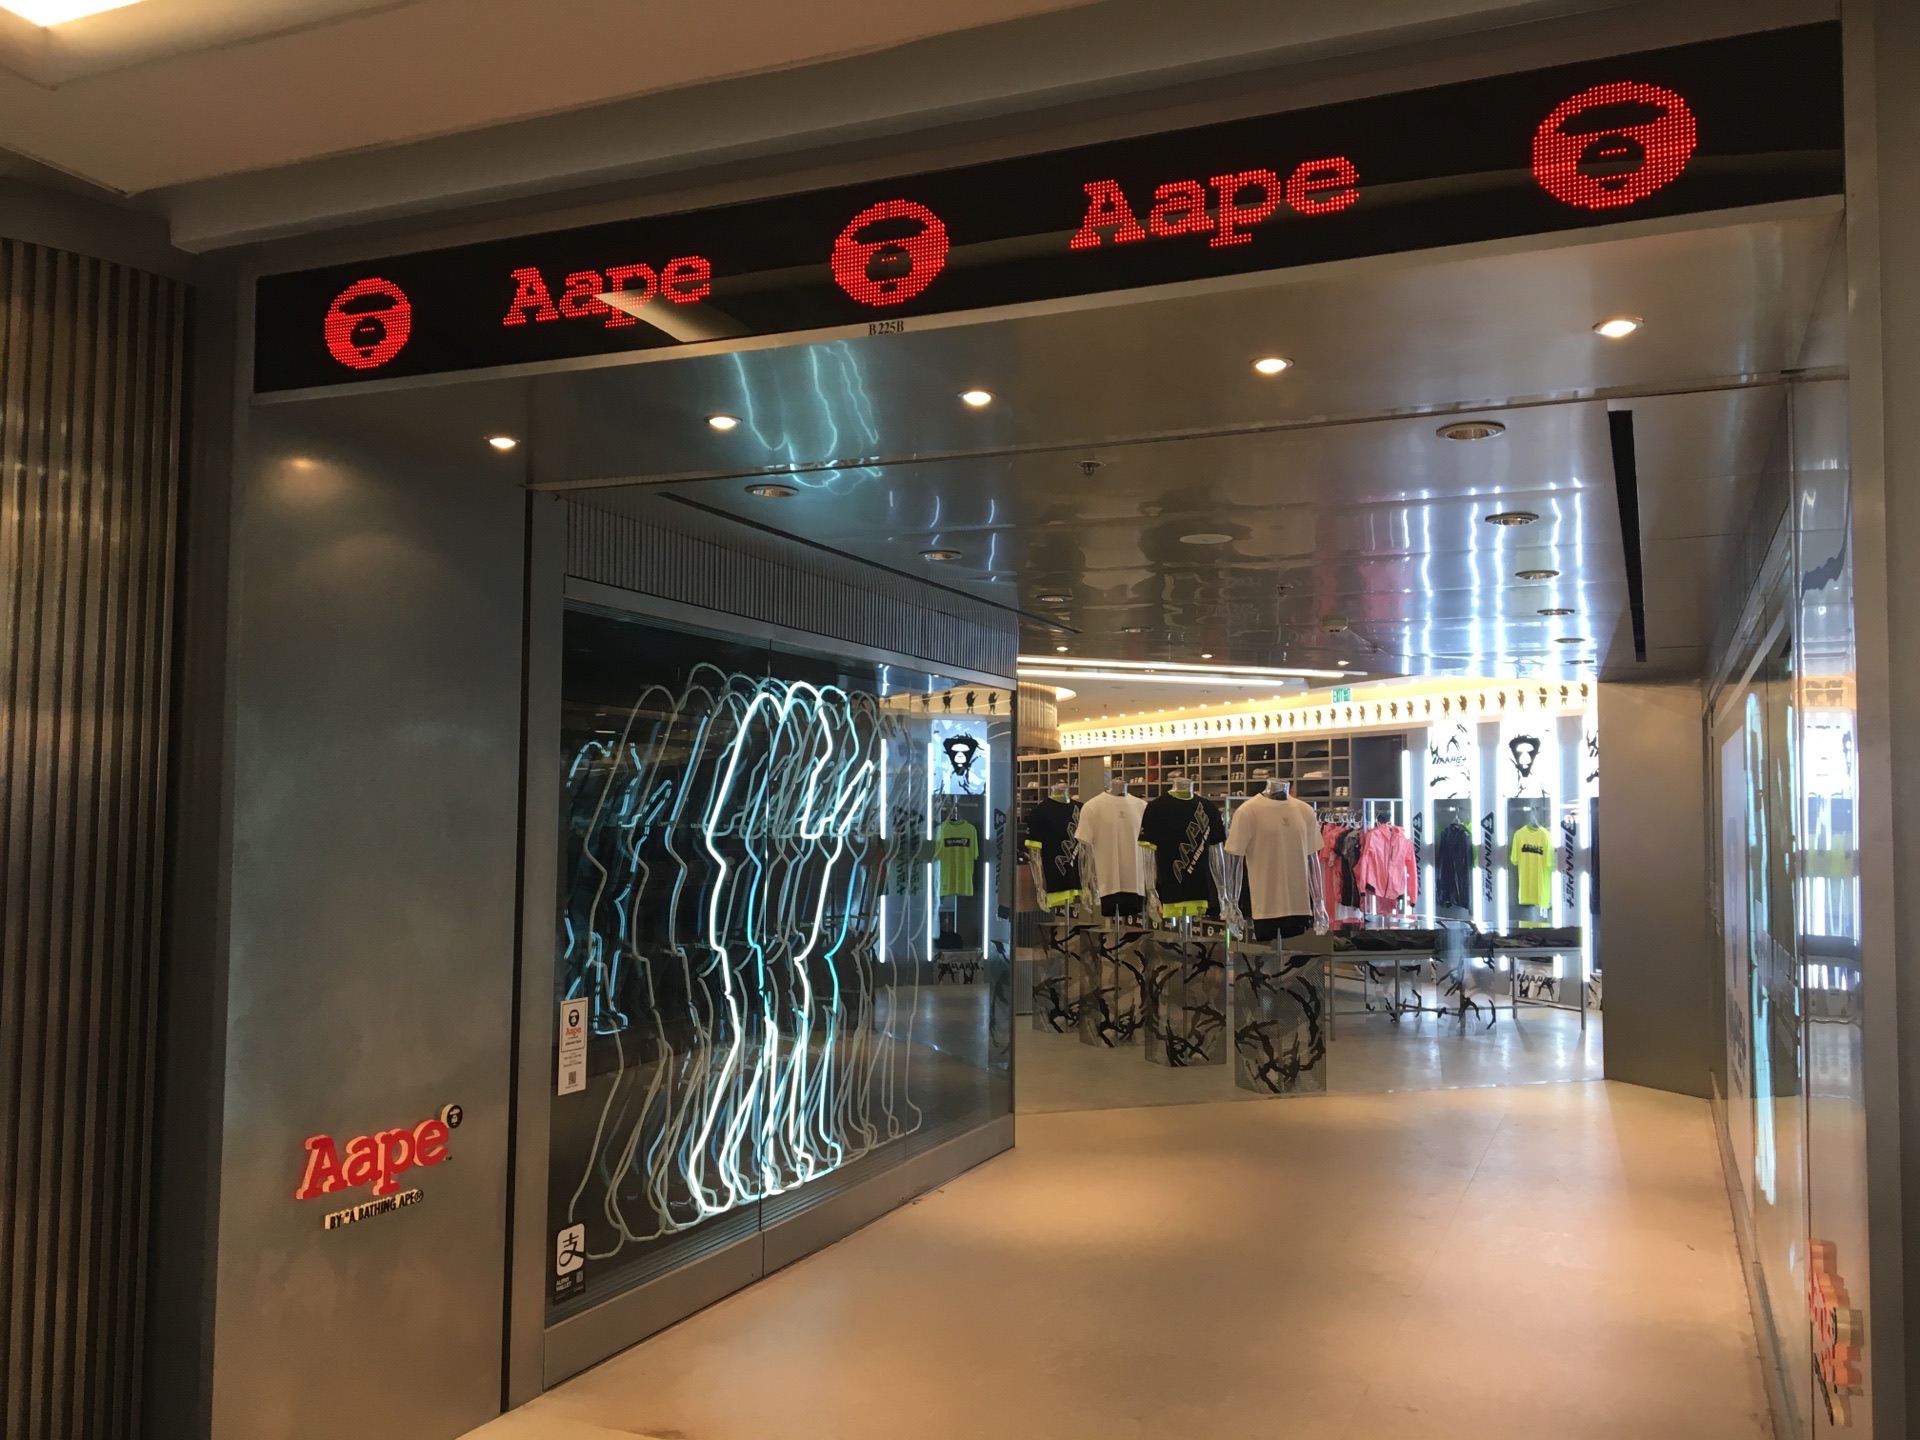 Bape travel guidebook –must visit attractions in Hong Kong – Bape nearby  recommendation – Trip.com